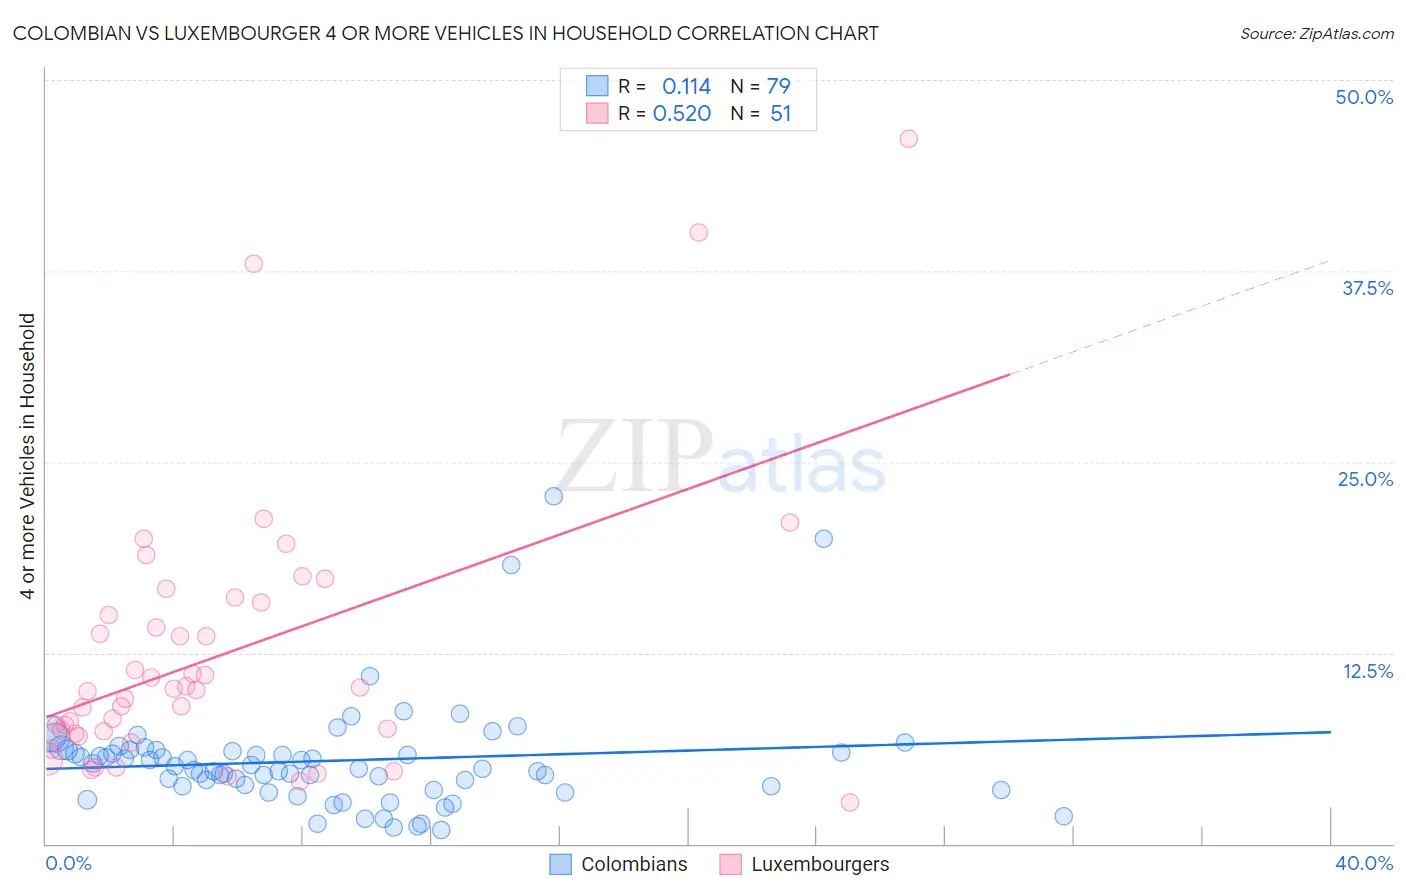 Colombian vs Luxembourger 4 or more Vehicles in Household